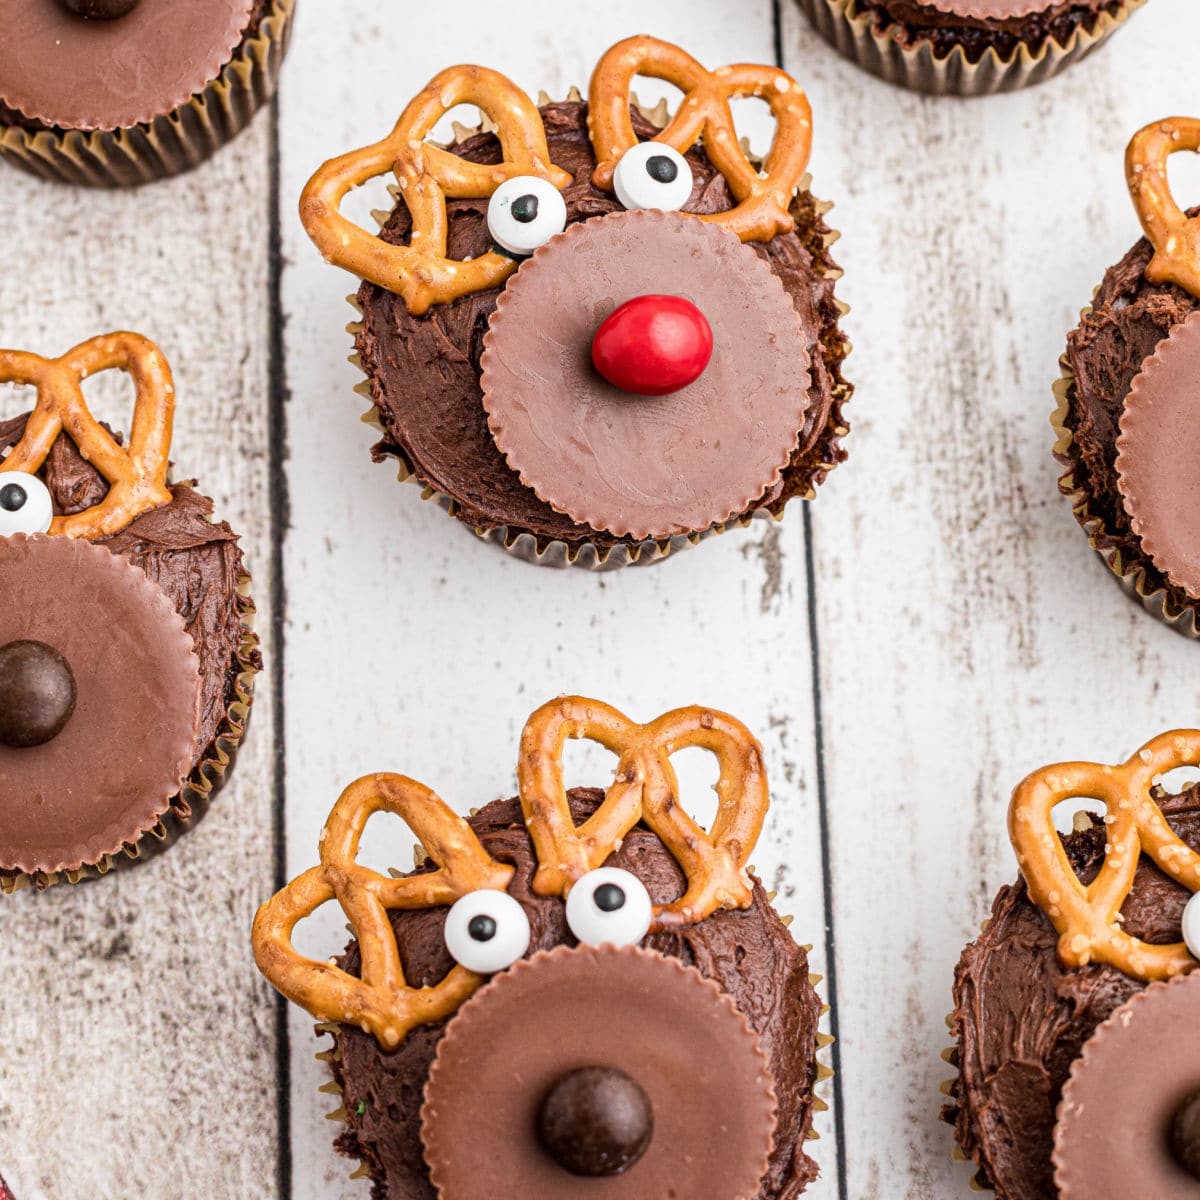 https://thecaglediaries.com/wp-content/uploads/2022/11/Reindeer-Cupcakes-Featured-Image.jpg